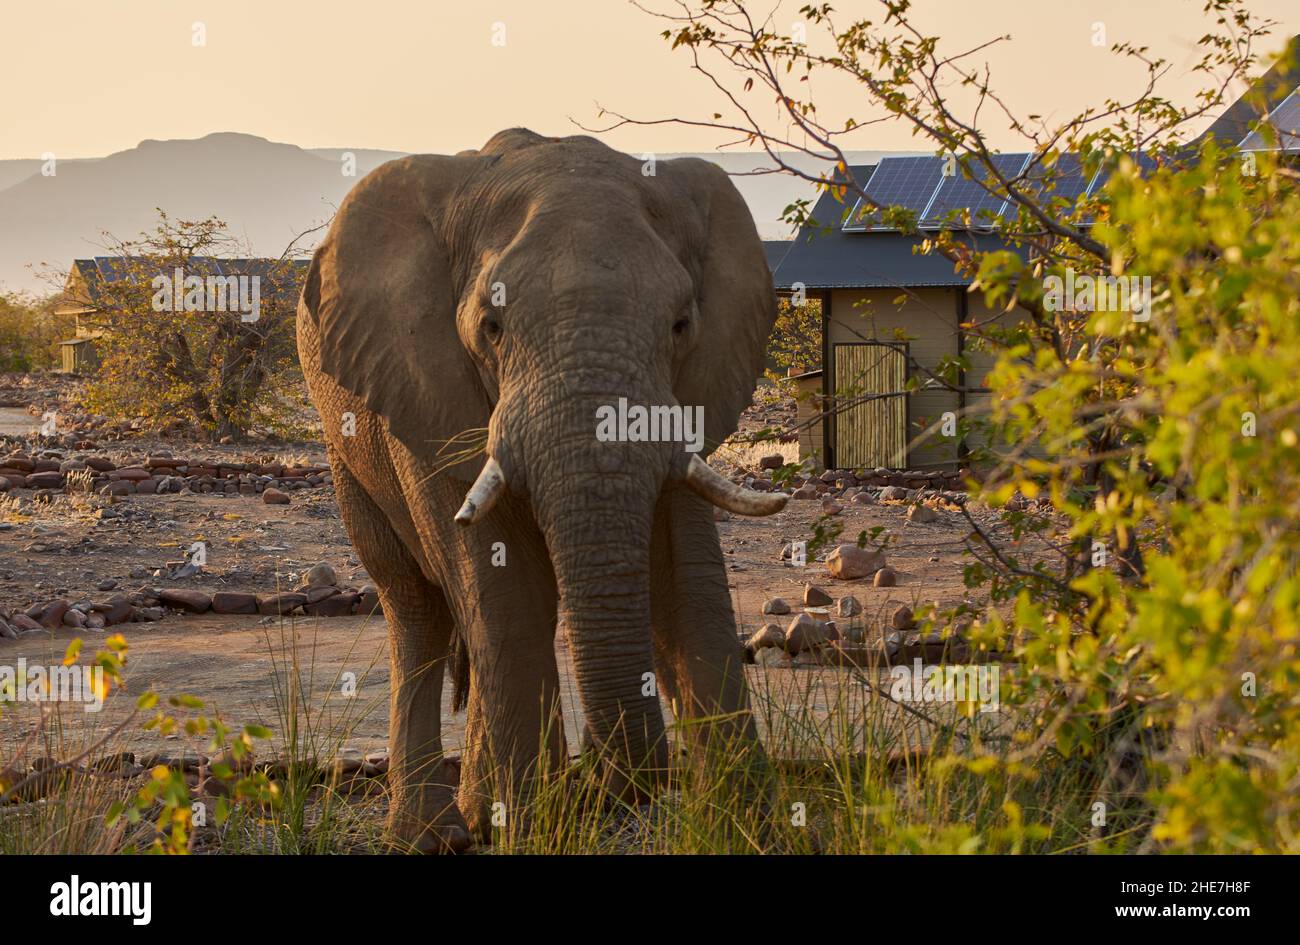 African elephant (Loxodonta africana) roams around residential area at sunset in Namibia, Africa. Stock Photo